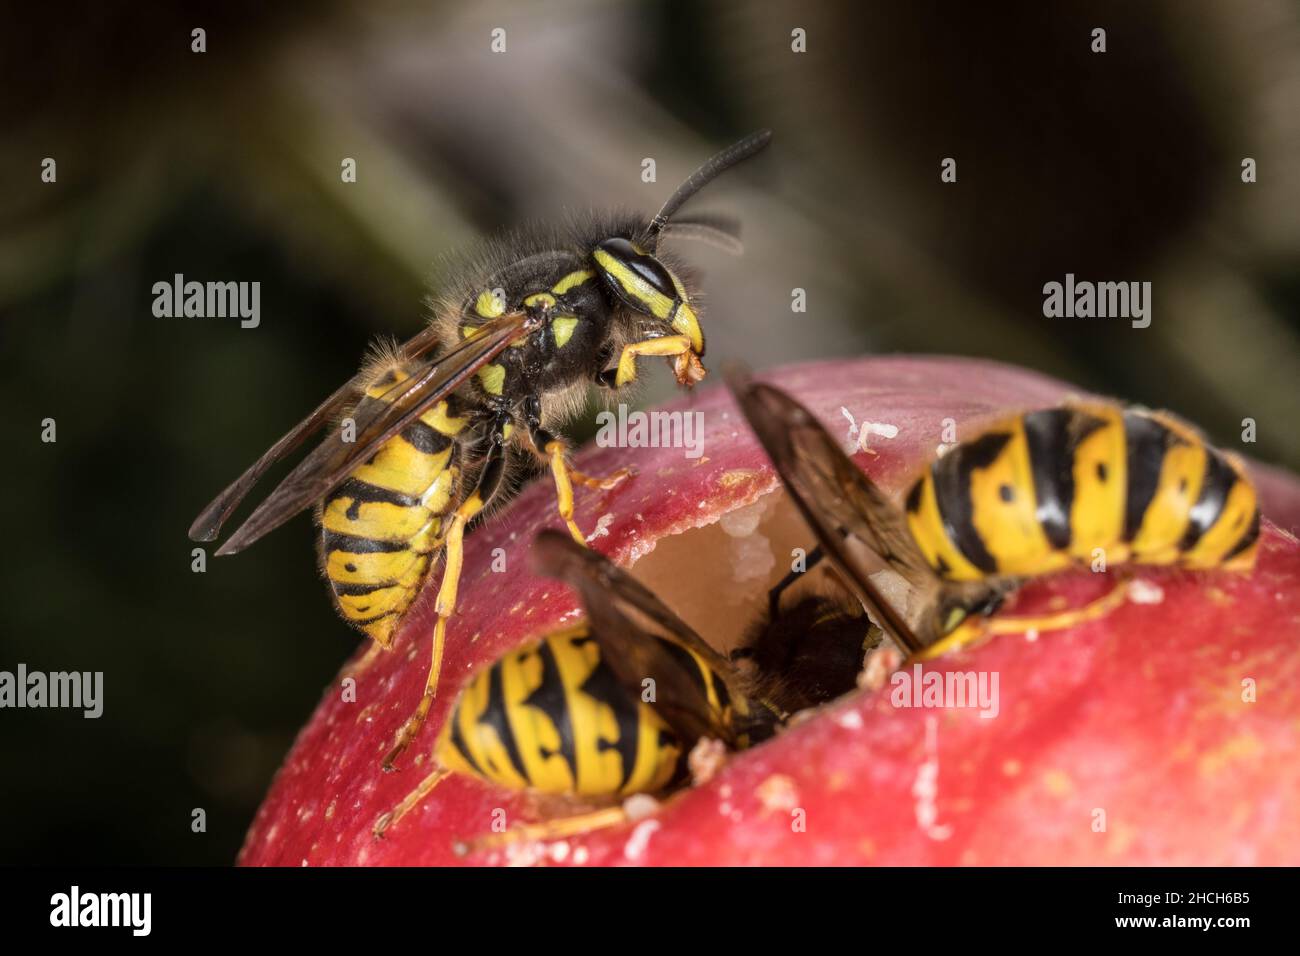 Wasps on Apple, automne, Angleterre, Royaume-Uni. Banque D'Images